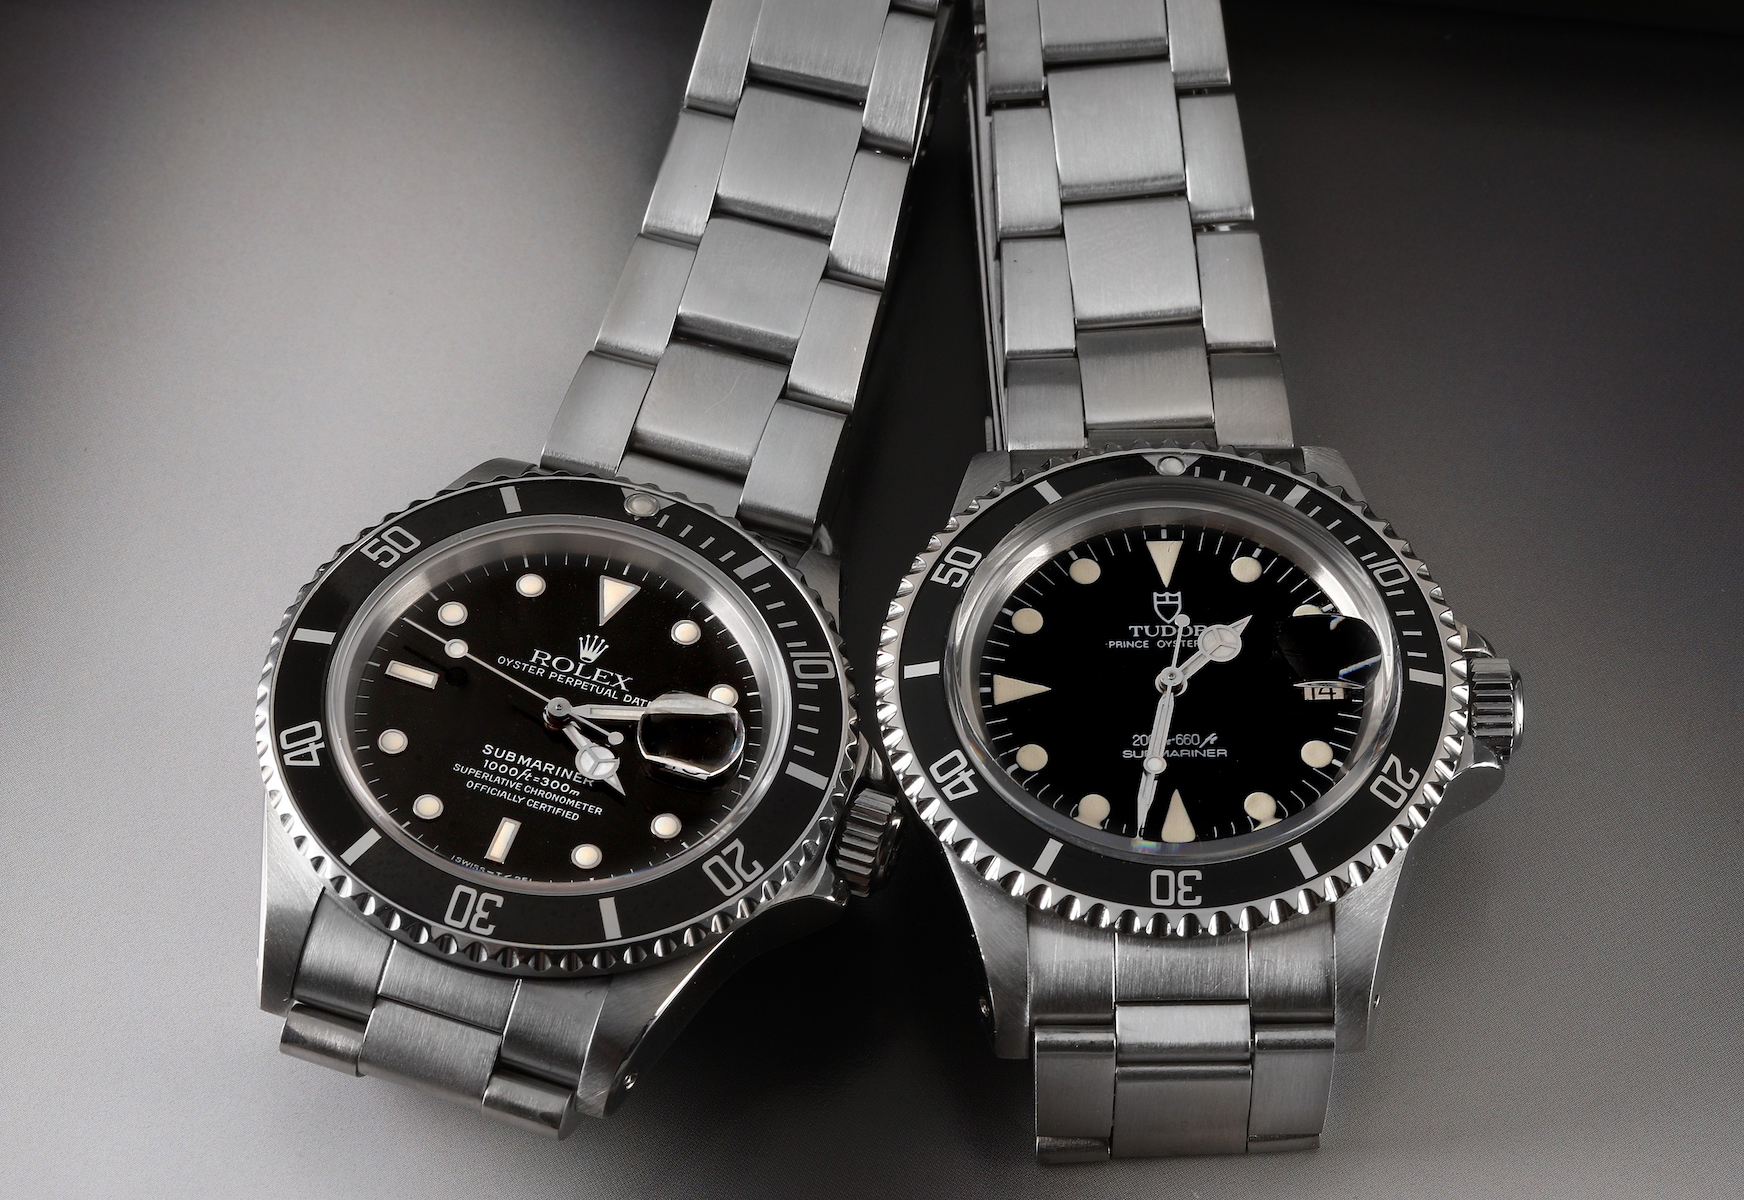 Most Iconic Steel Sports Watches - Rolex Submariner 16610 and Tudor Submariner 76100